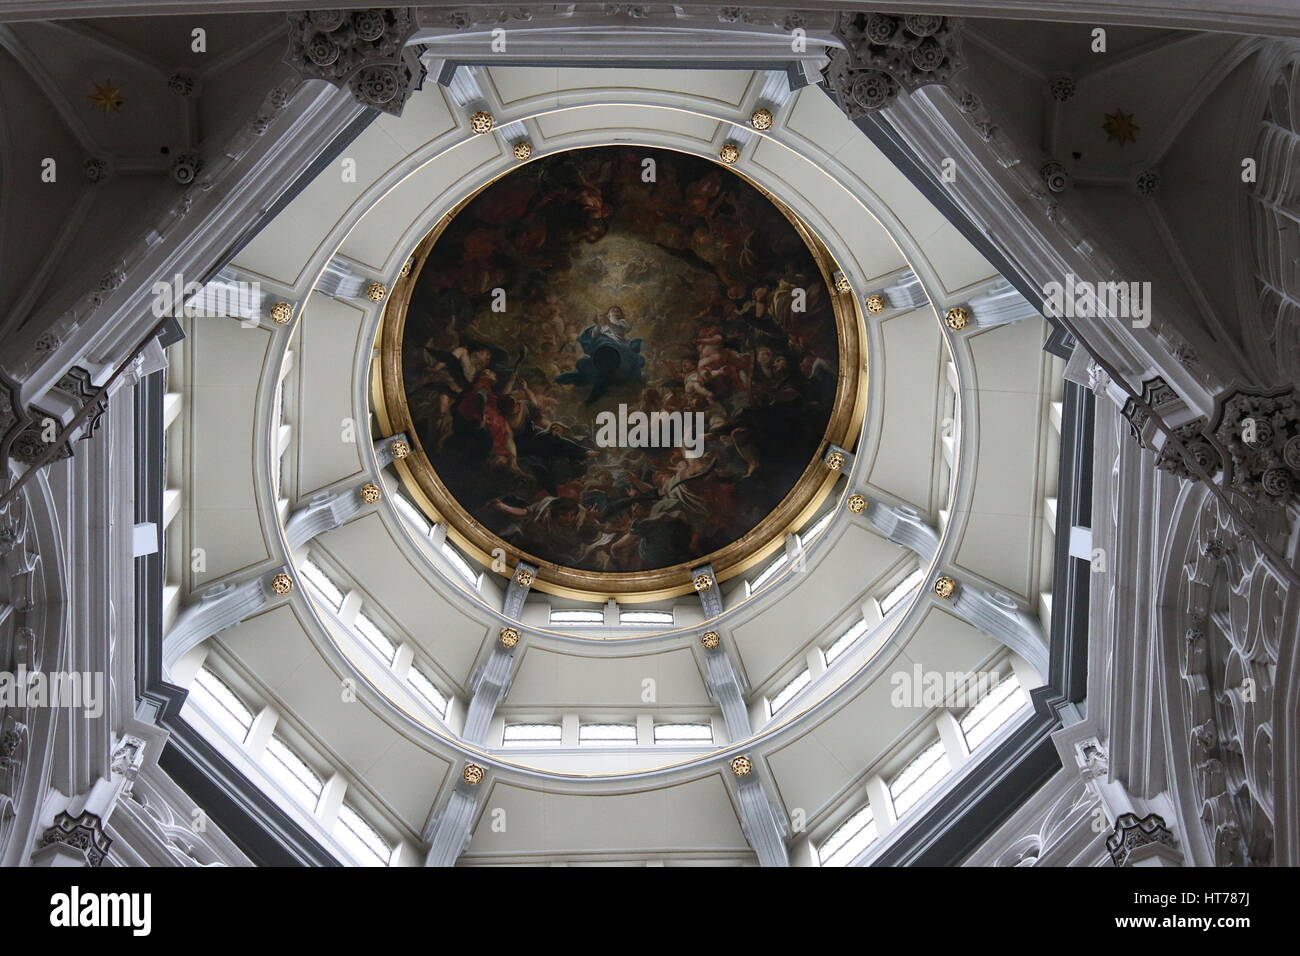 Dome and roof of the Gothic Cathedral of our Lady (Onze-lieve-vrouwekathedraal), Antwerp, Belgium Stock Photo